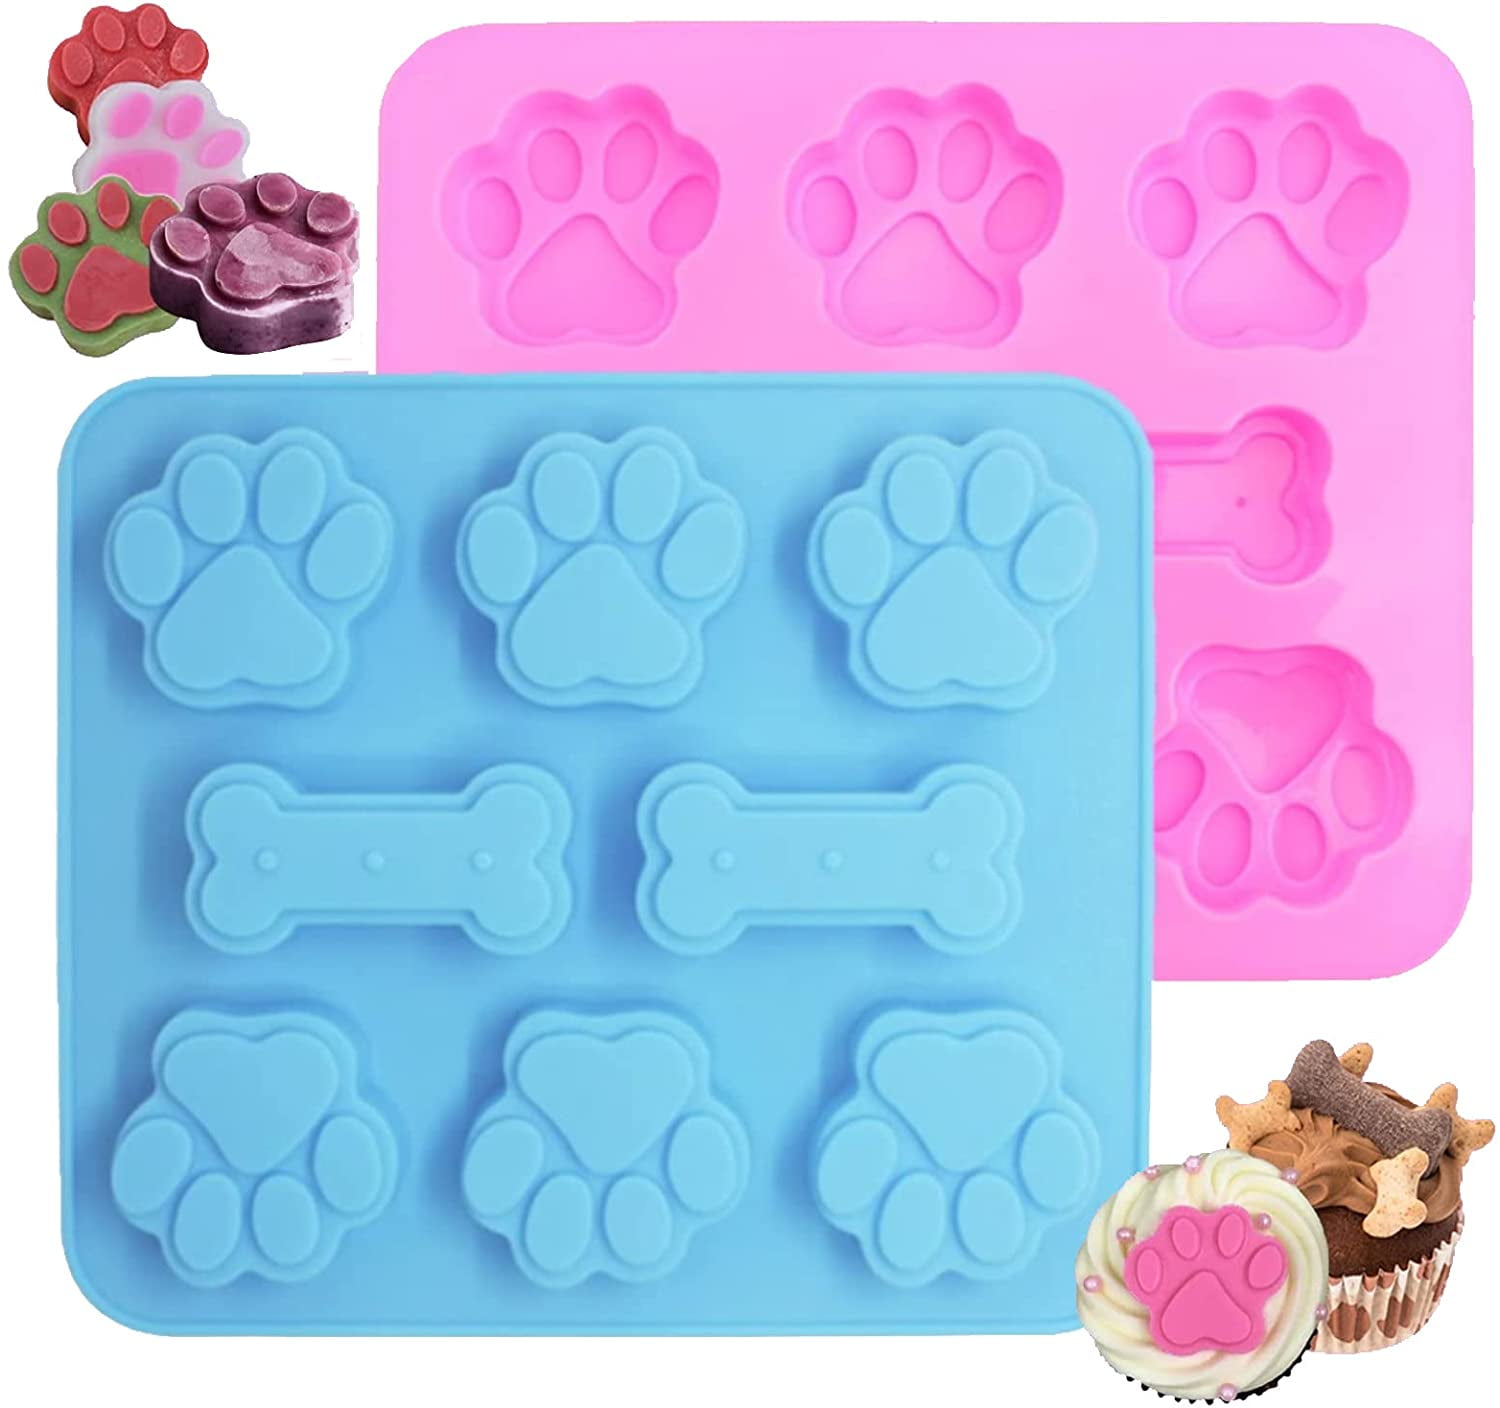 LE DOGUE Dog Paws & Bones Silicone Baking Molds with Recipe Booklet, 2-pack  